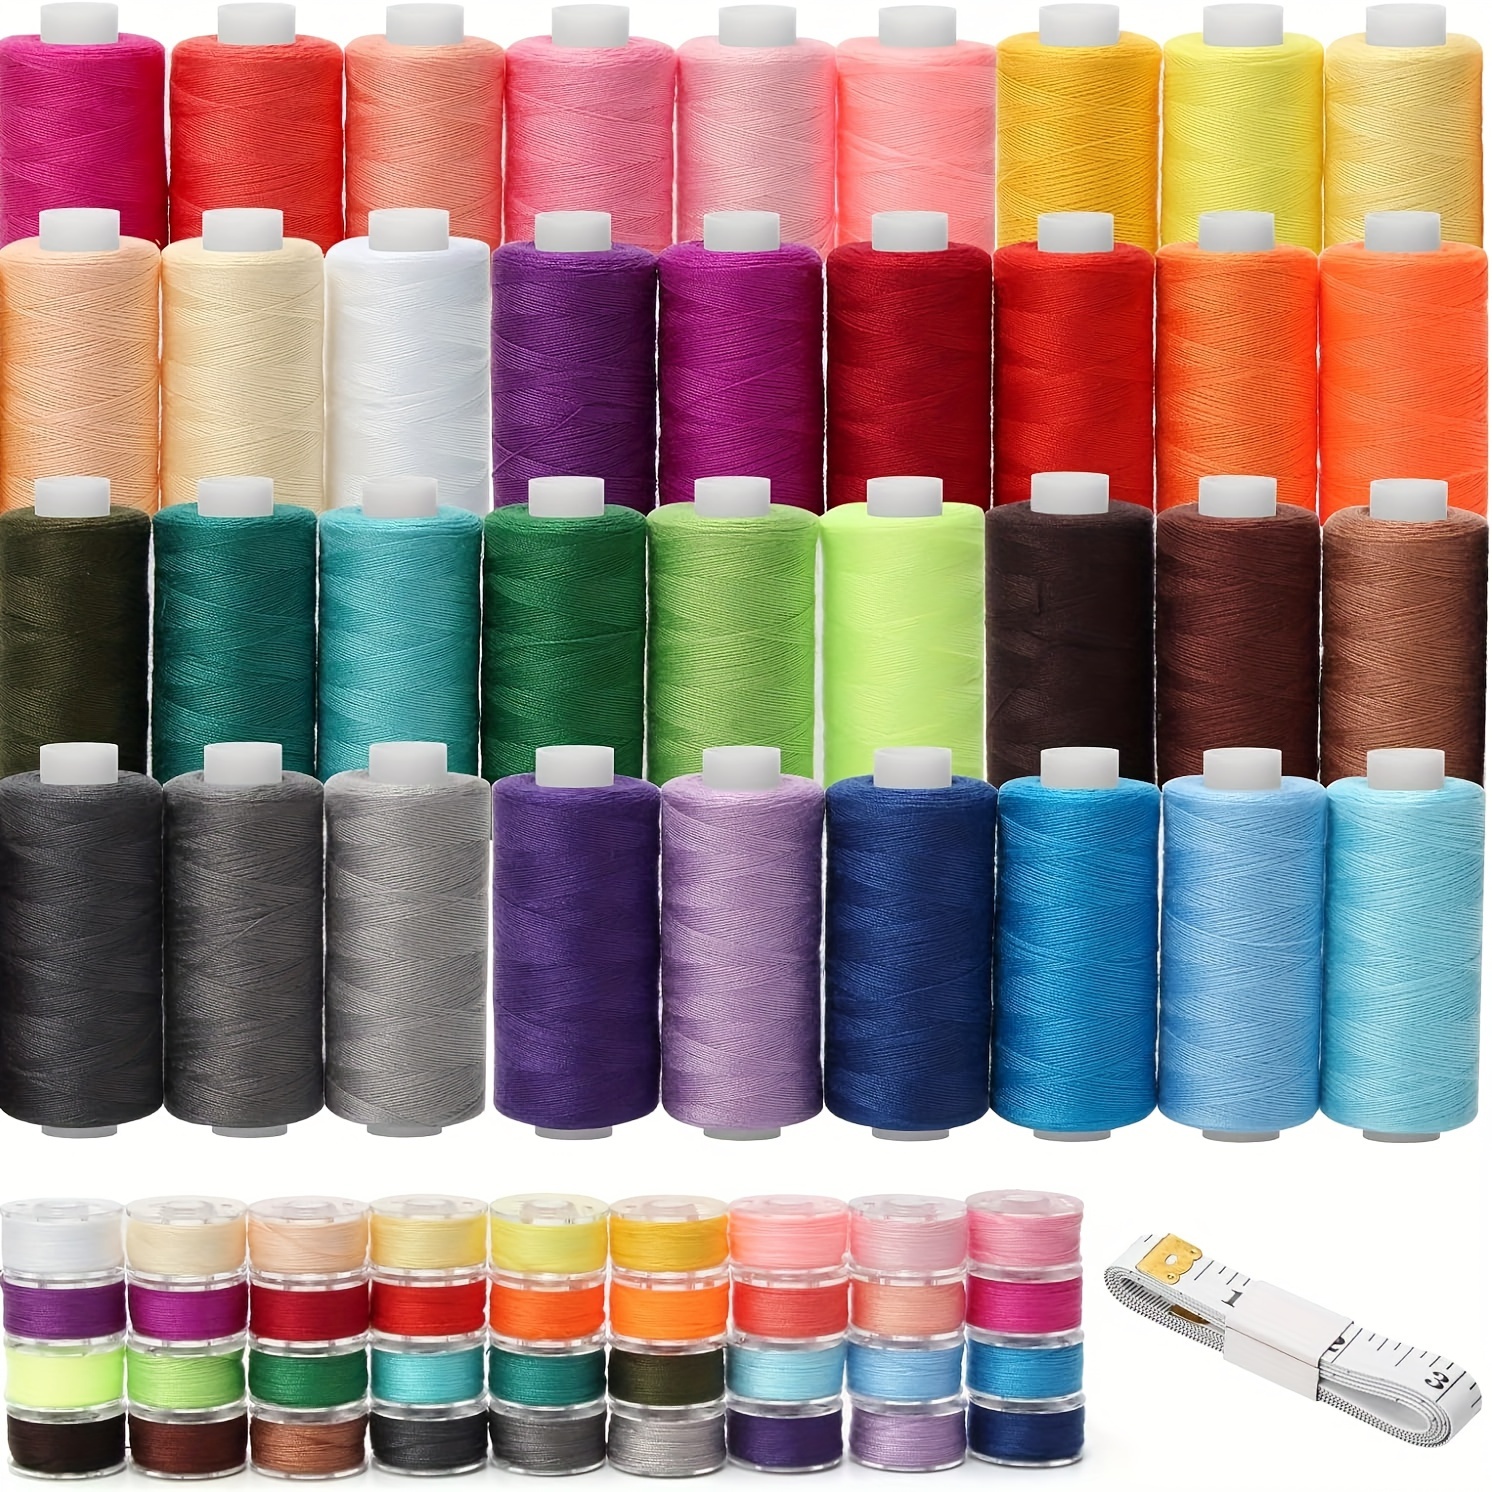 

72-piece Sewing Thread Kit With 400 Yards Each, Pre-wound Spools In Storage Box - 36 Vibrant Colors For Hand & Machine Stitching, Diy Projects, Emergency Repairs & Travel